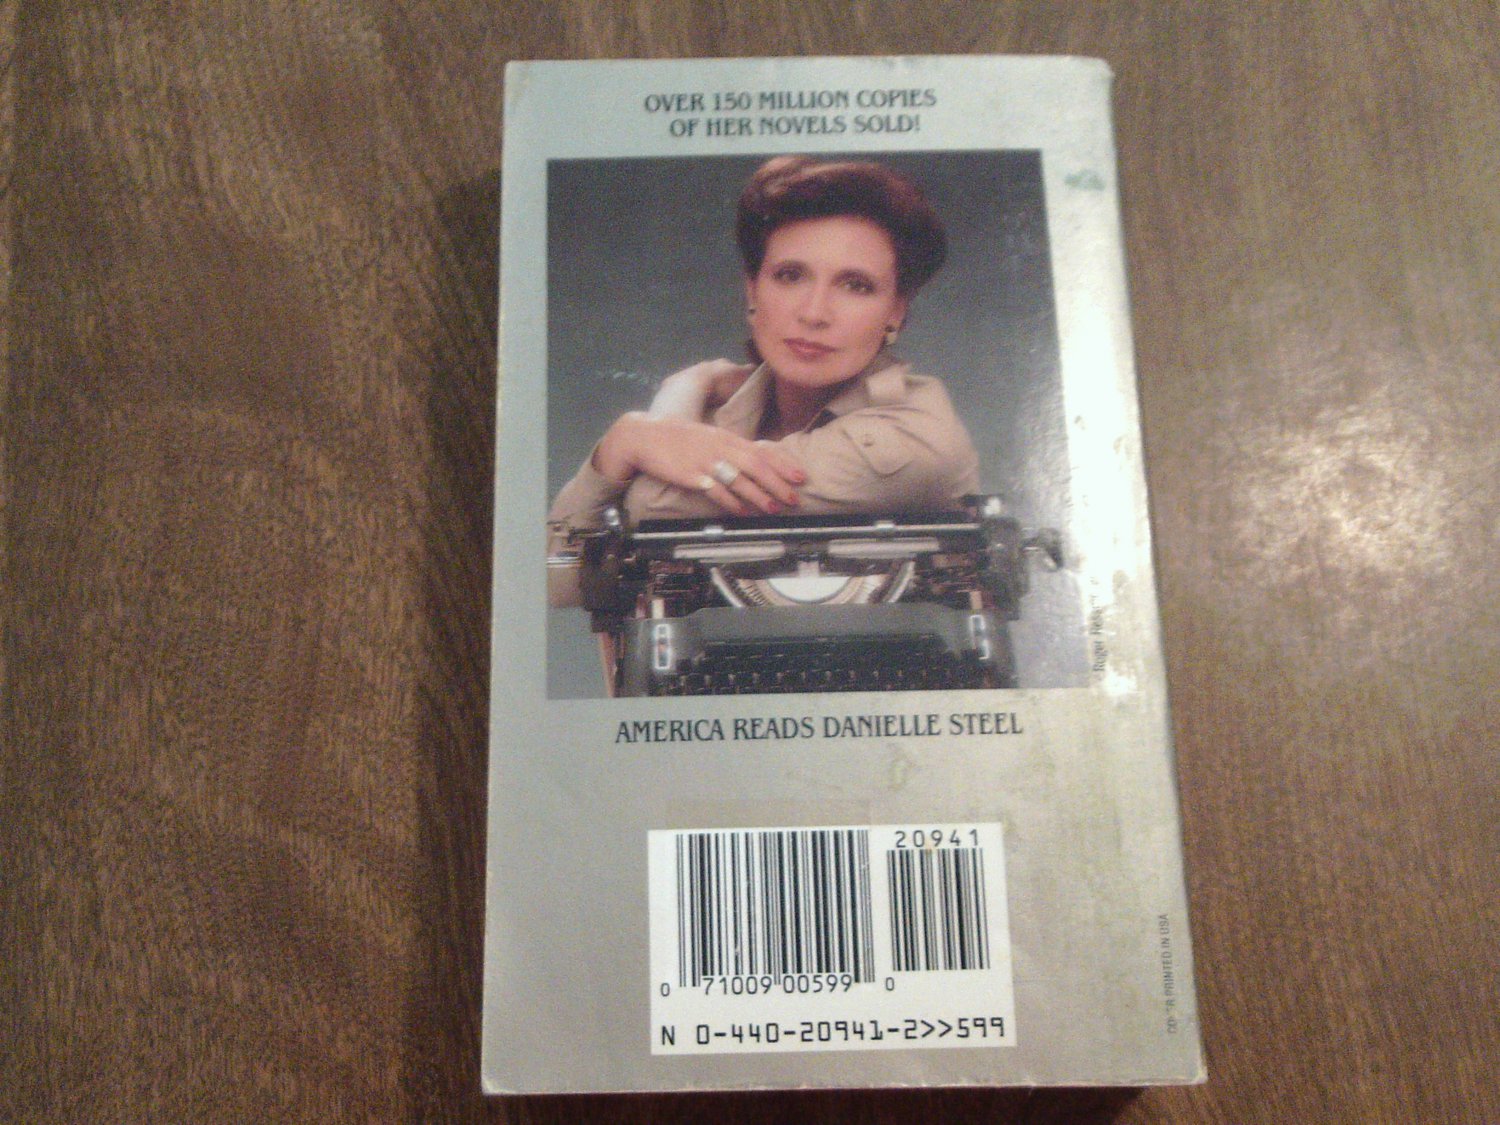 danielle steel message from nam book